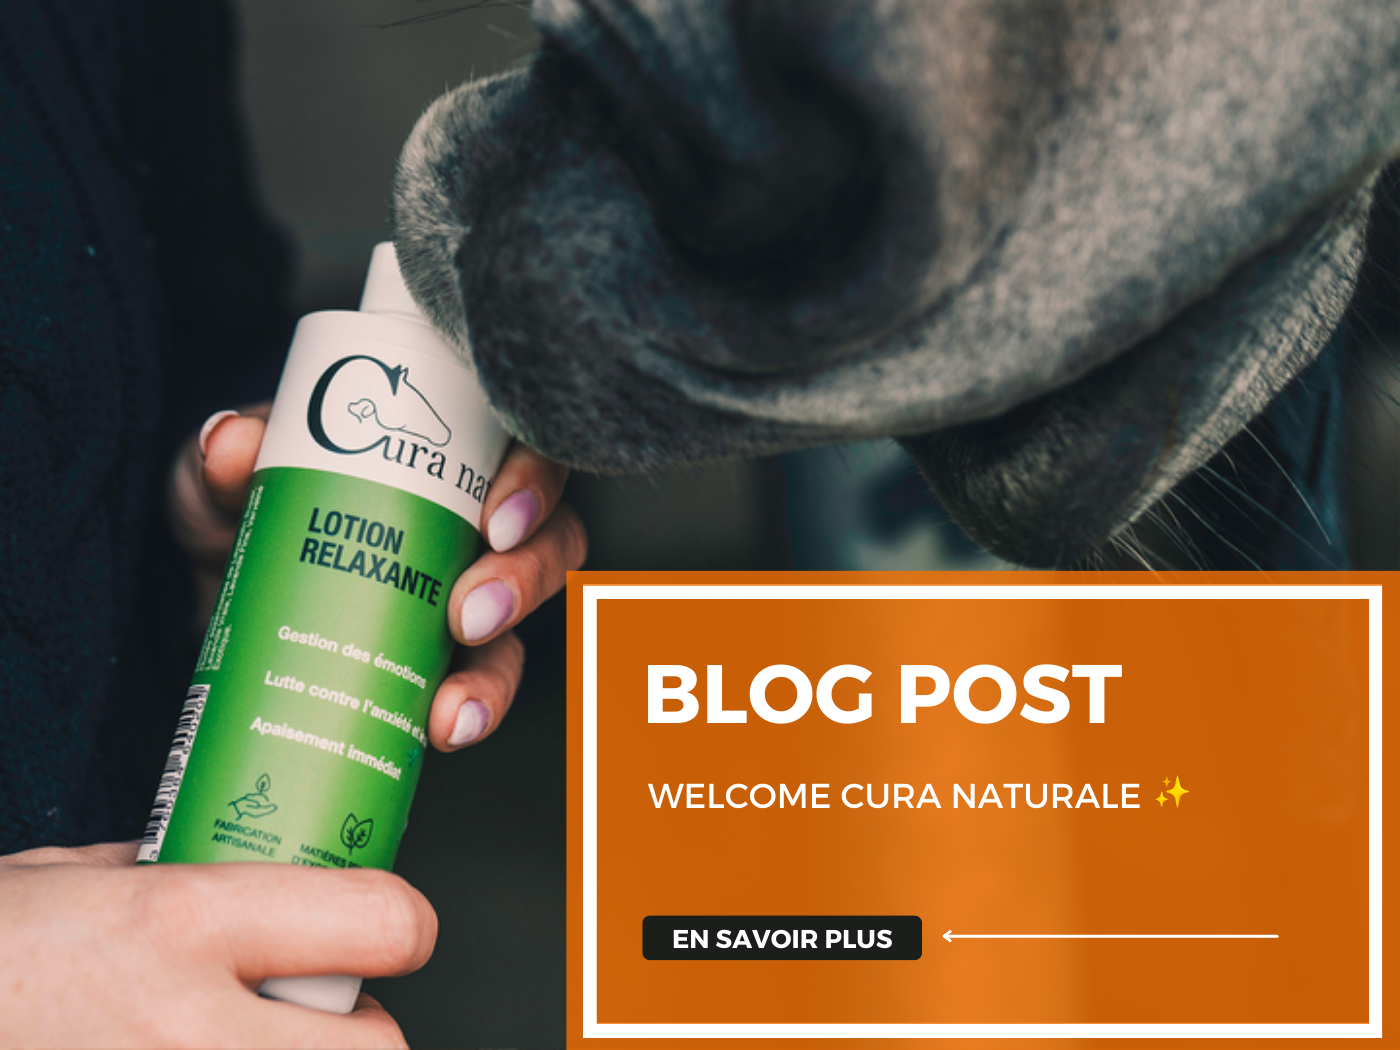 WELCOME CURA NATURALE ✨